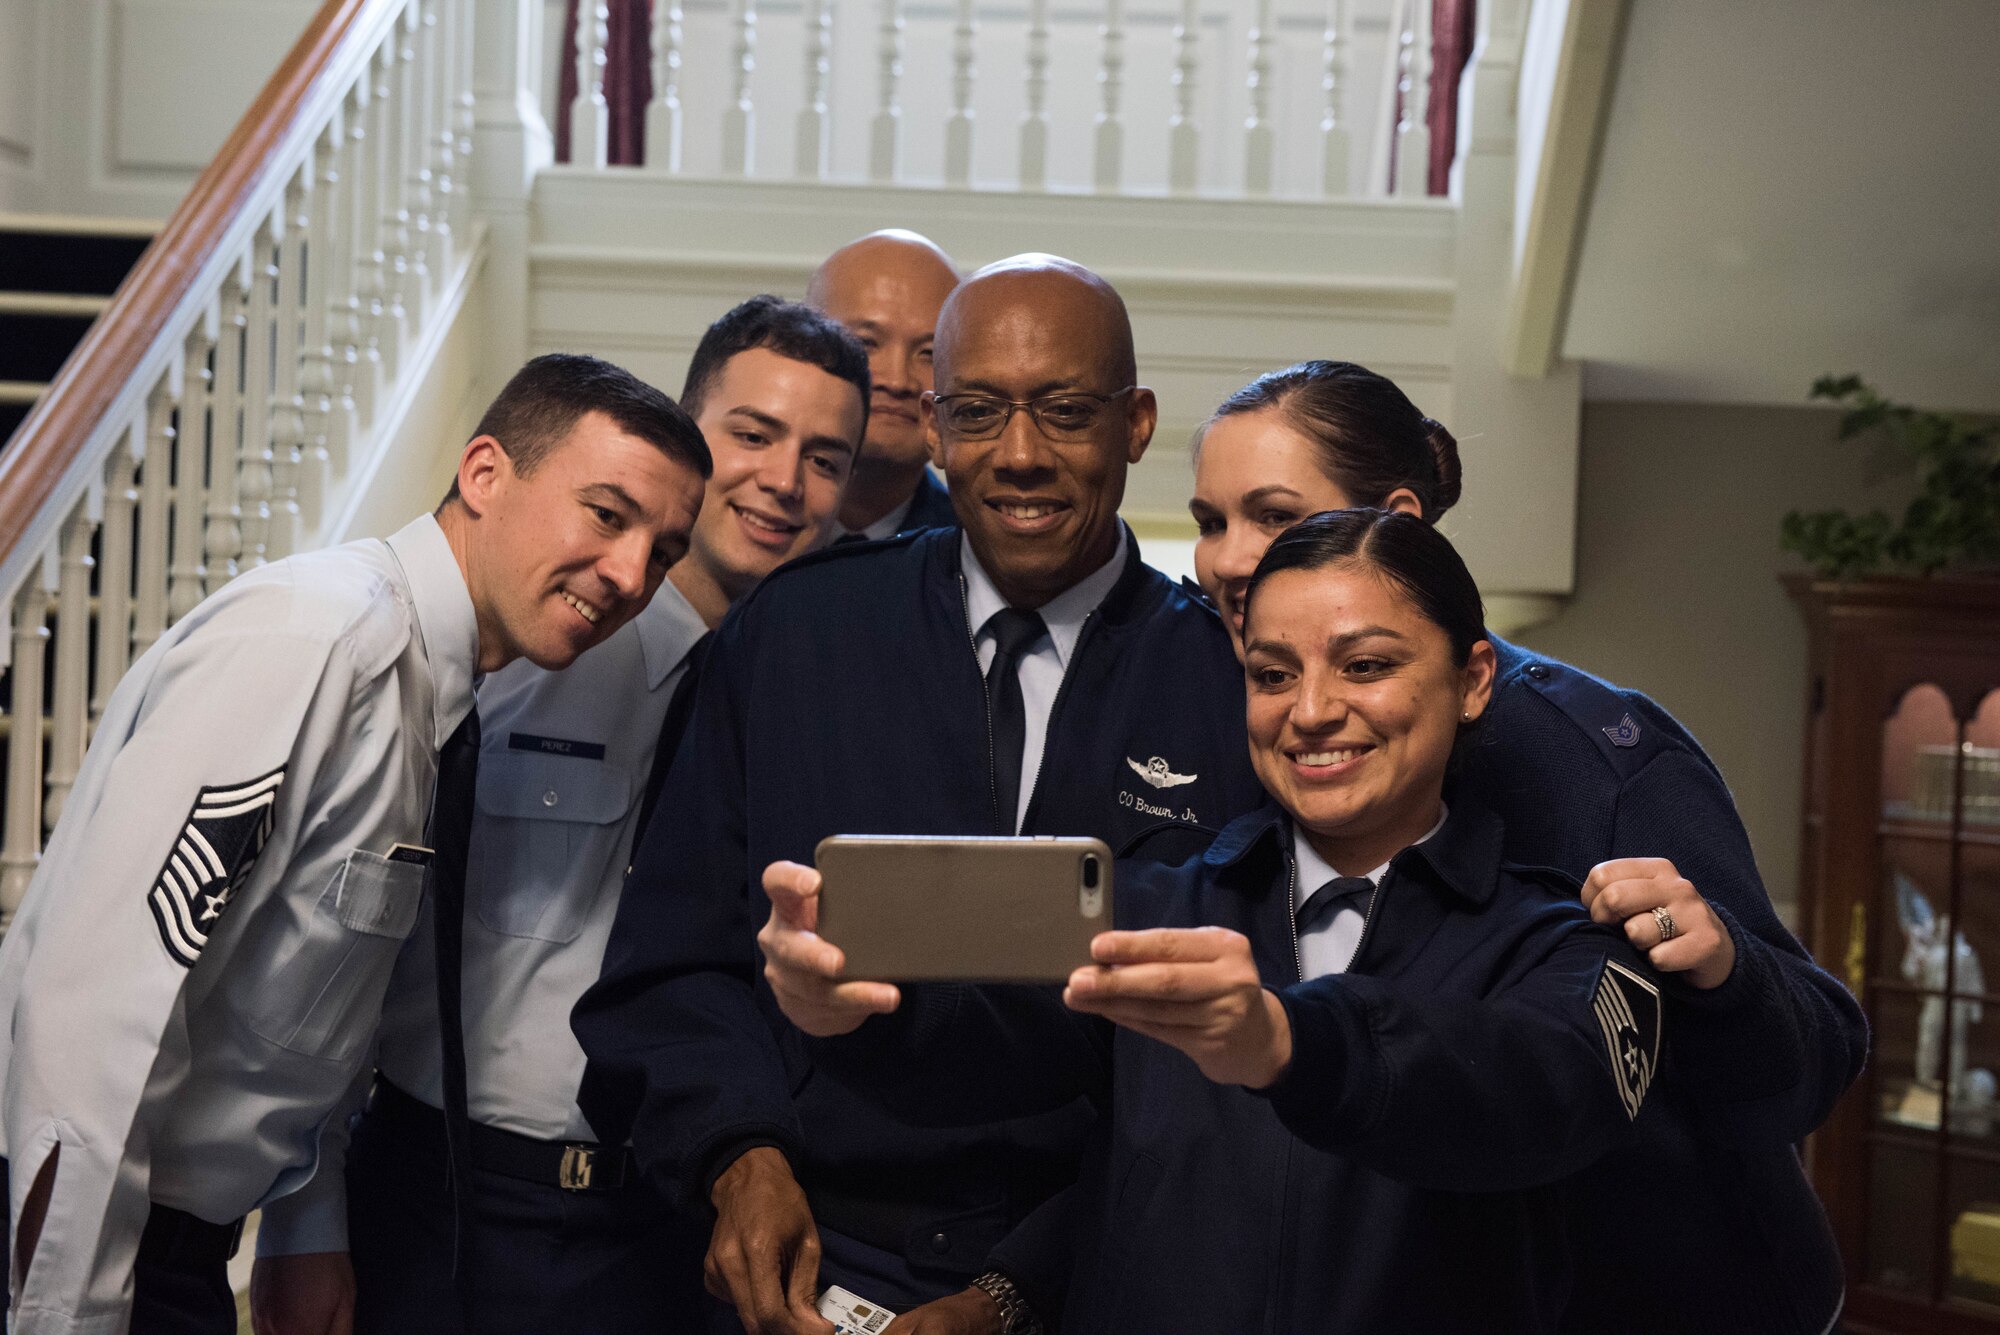 Gen. CQ Brown, Jr., Pacific Air Forces commander, takes a photo with 337th Air Support Flight Airmen at the U.S. Embassy in Canberra, Australia, Aug. 10, 2018. His first trip to the region since taking command on July 26, 2018, Brown also met with key defense and military leaders in Canberra and Royal Australian Air Force Bases Williamtown, Tindal and Darwin to see first-hand the strength of the U.S.-Australia alliance and discuss opportunities to ensure a free and open Indo-Pacific region. (U.S. Air Force photo by Staff Sgt. Hailey Haux)